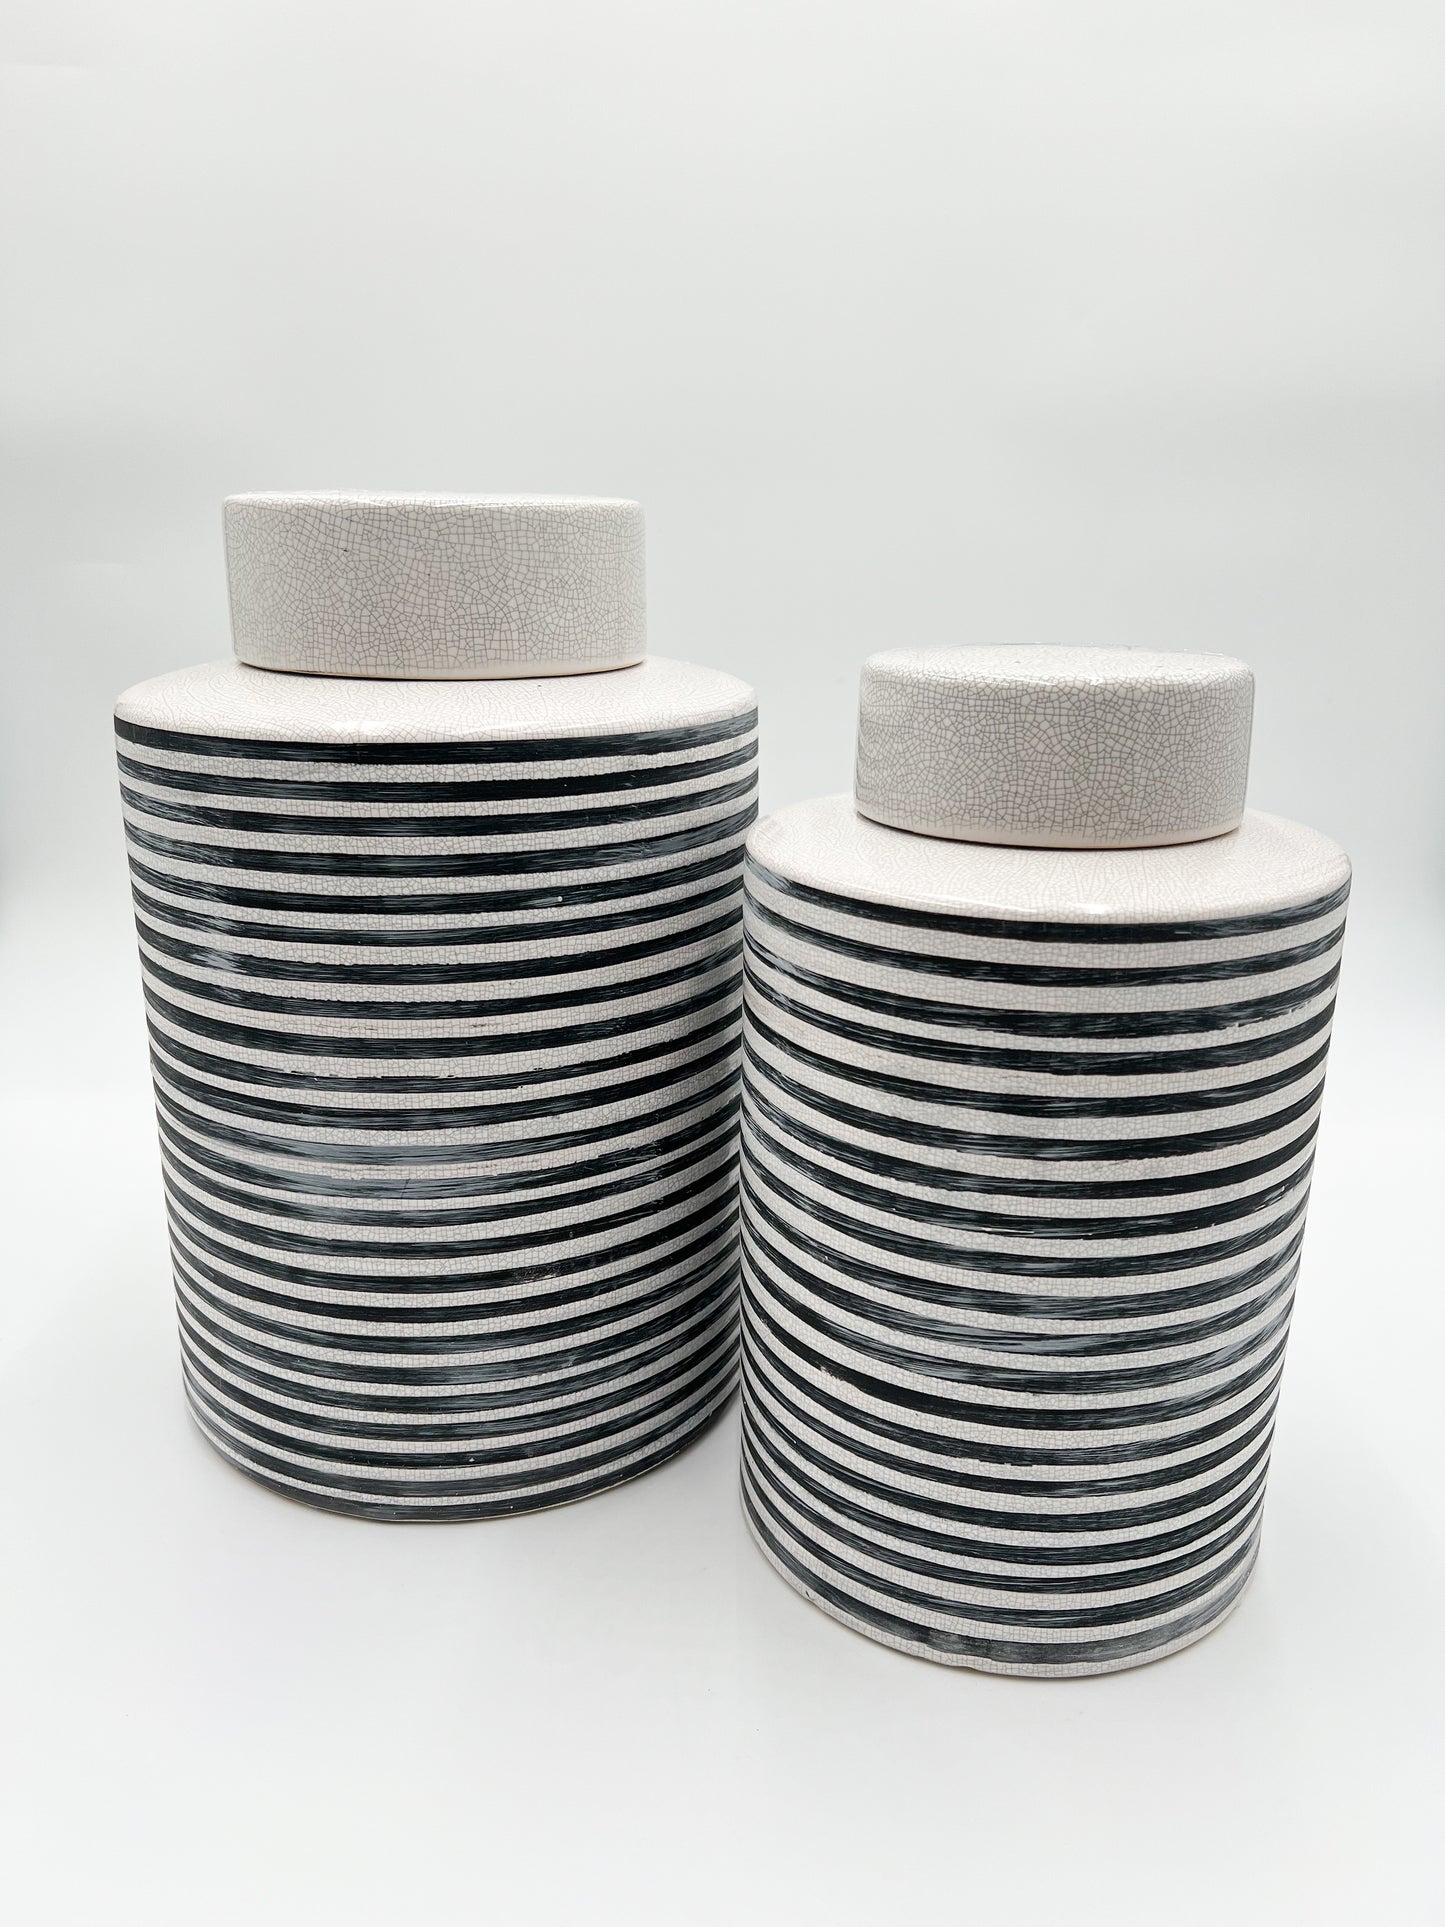 Striped Lidded Ceramic Jar - Two sizes available